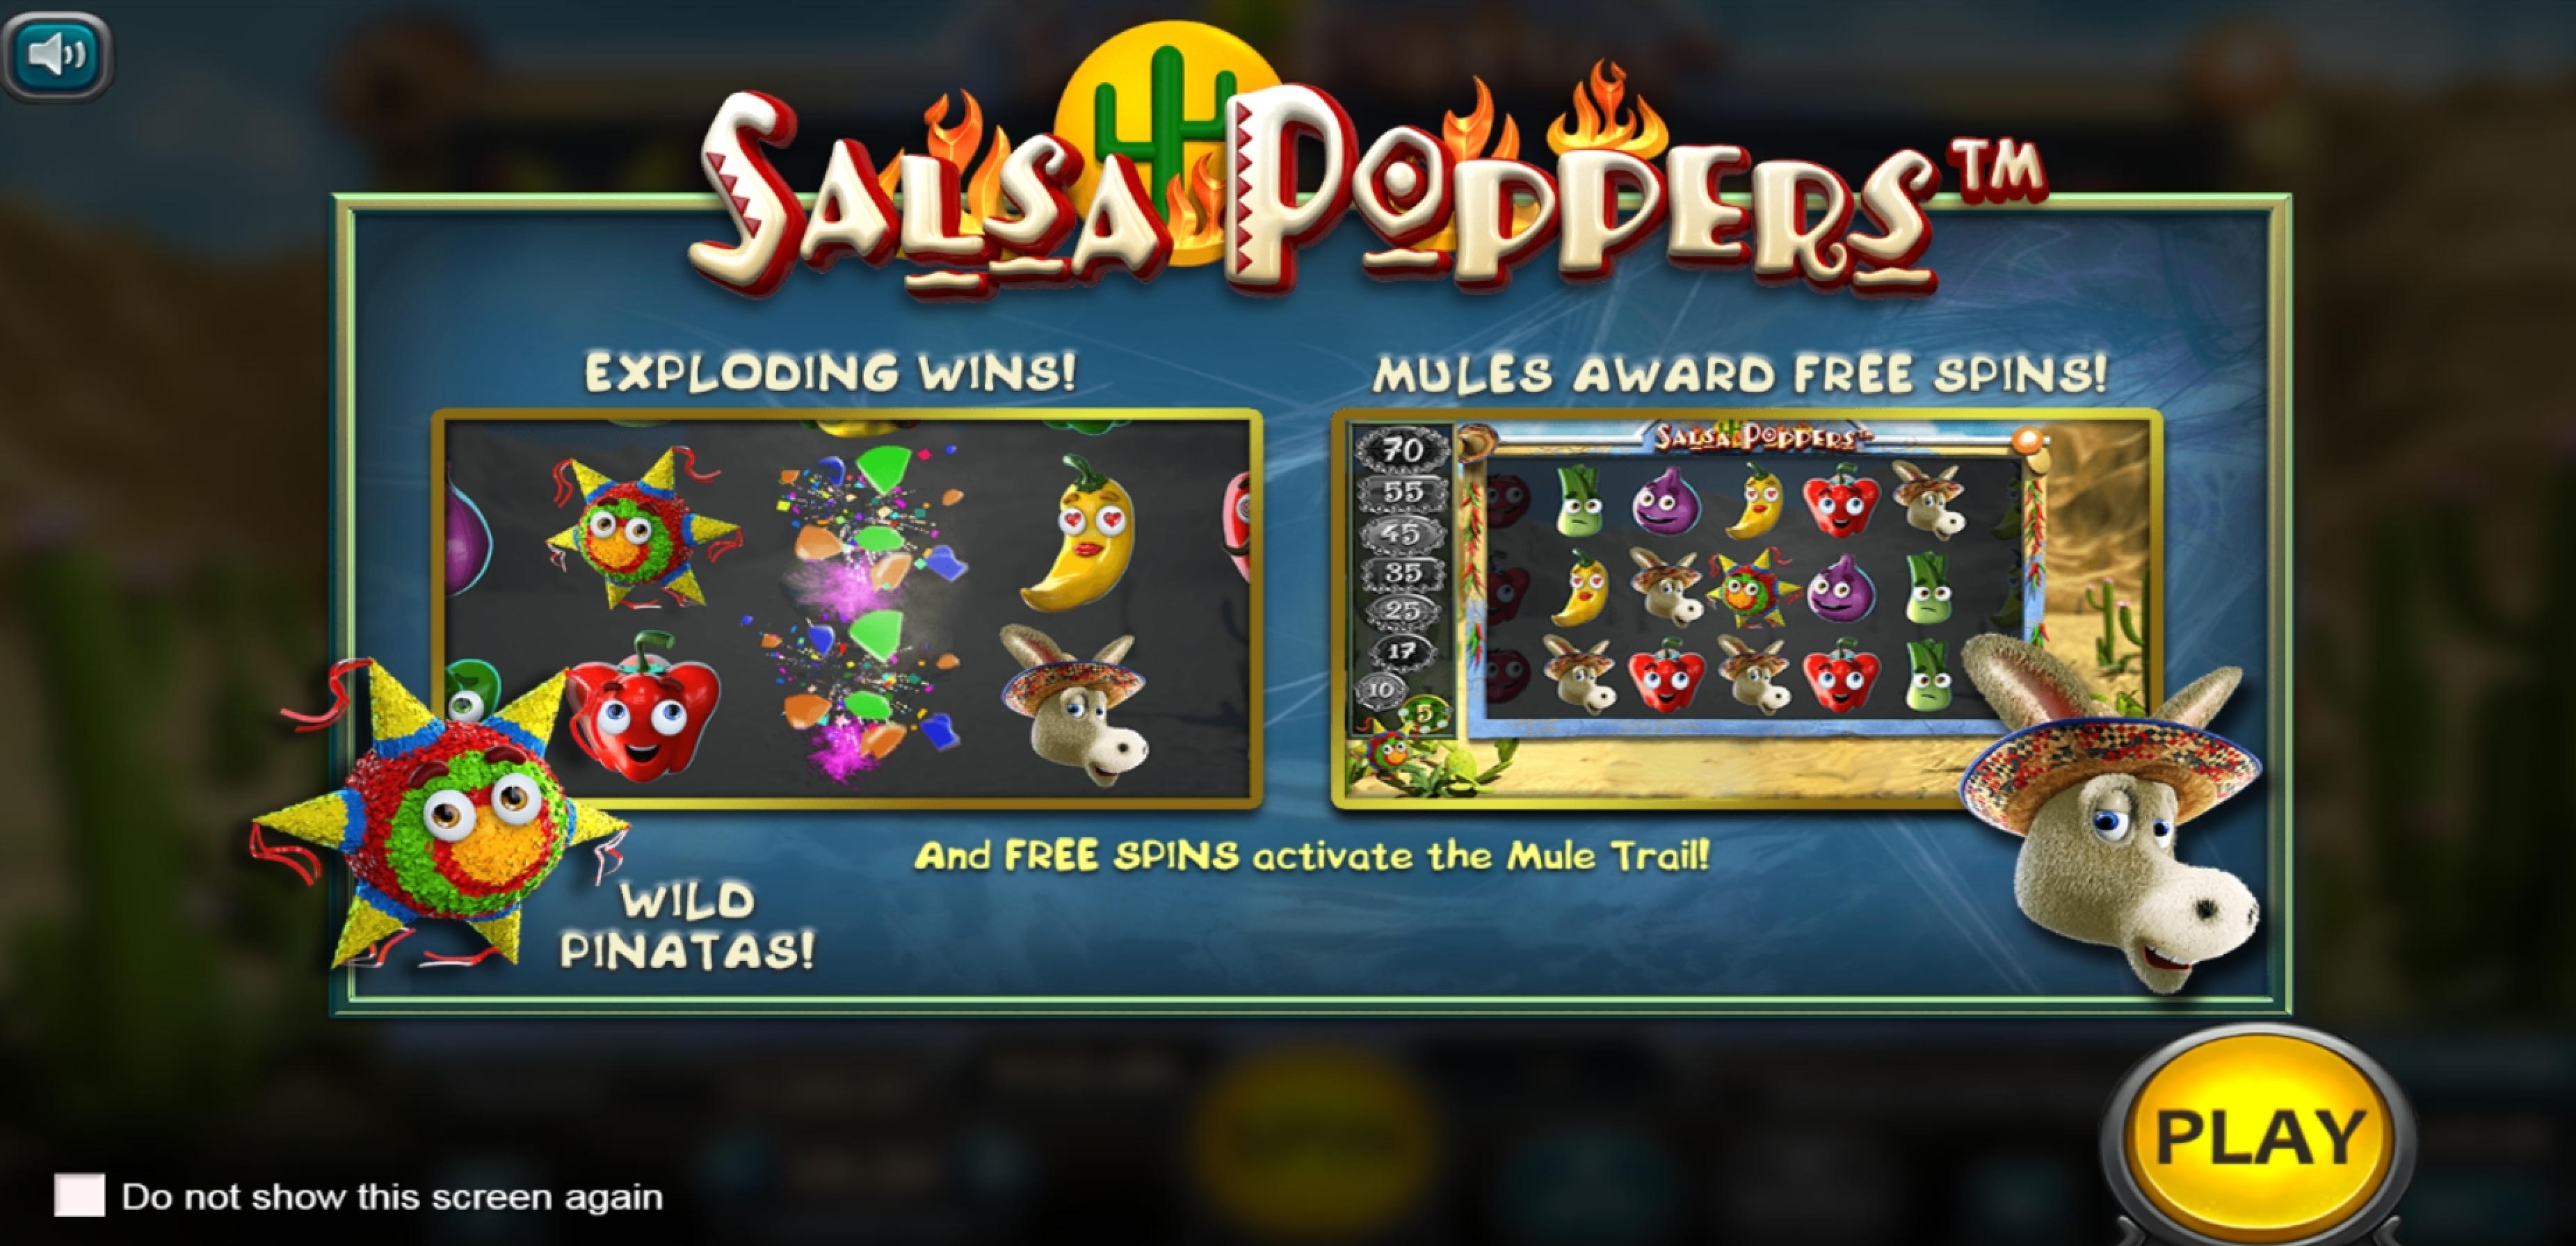 Play Salsa Poppers Free Casino Slot Game by Nucleus Gaming